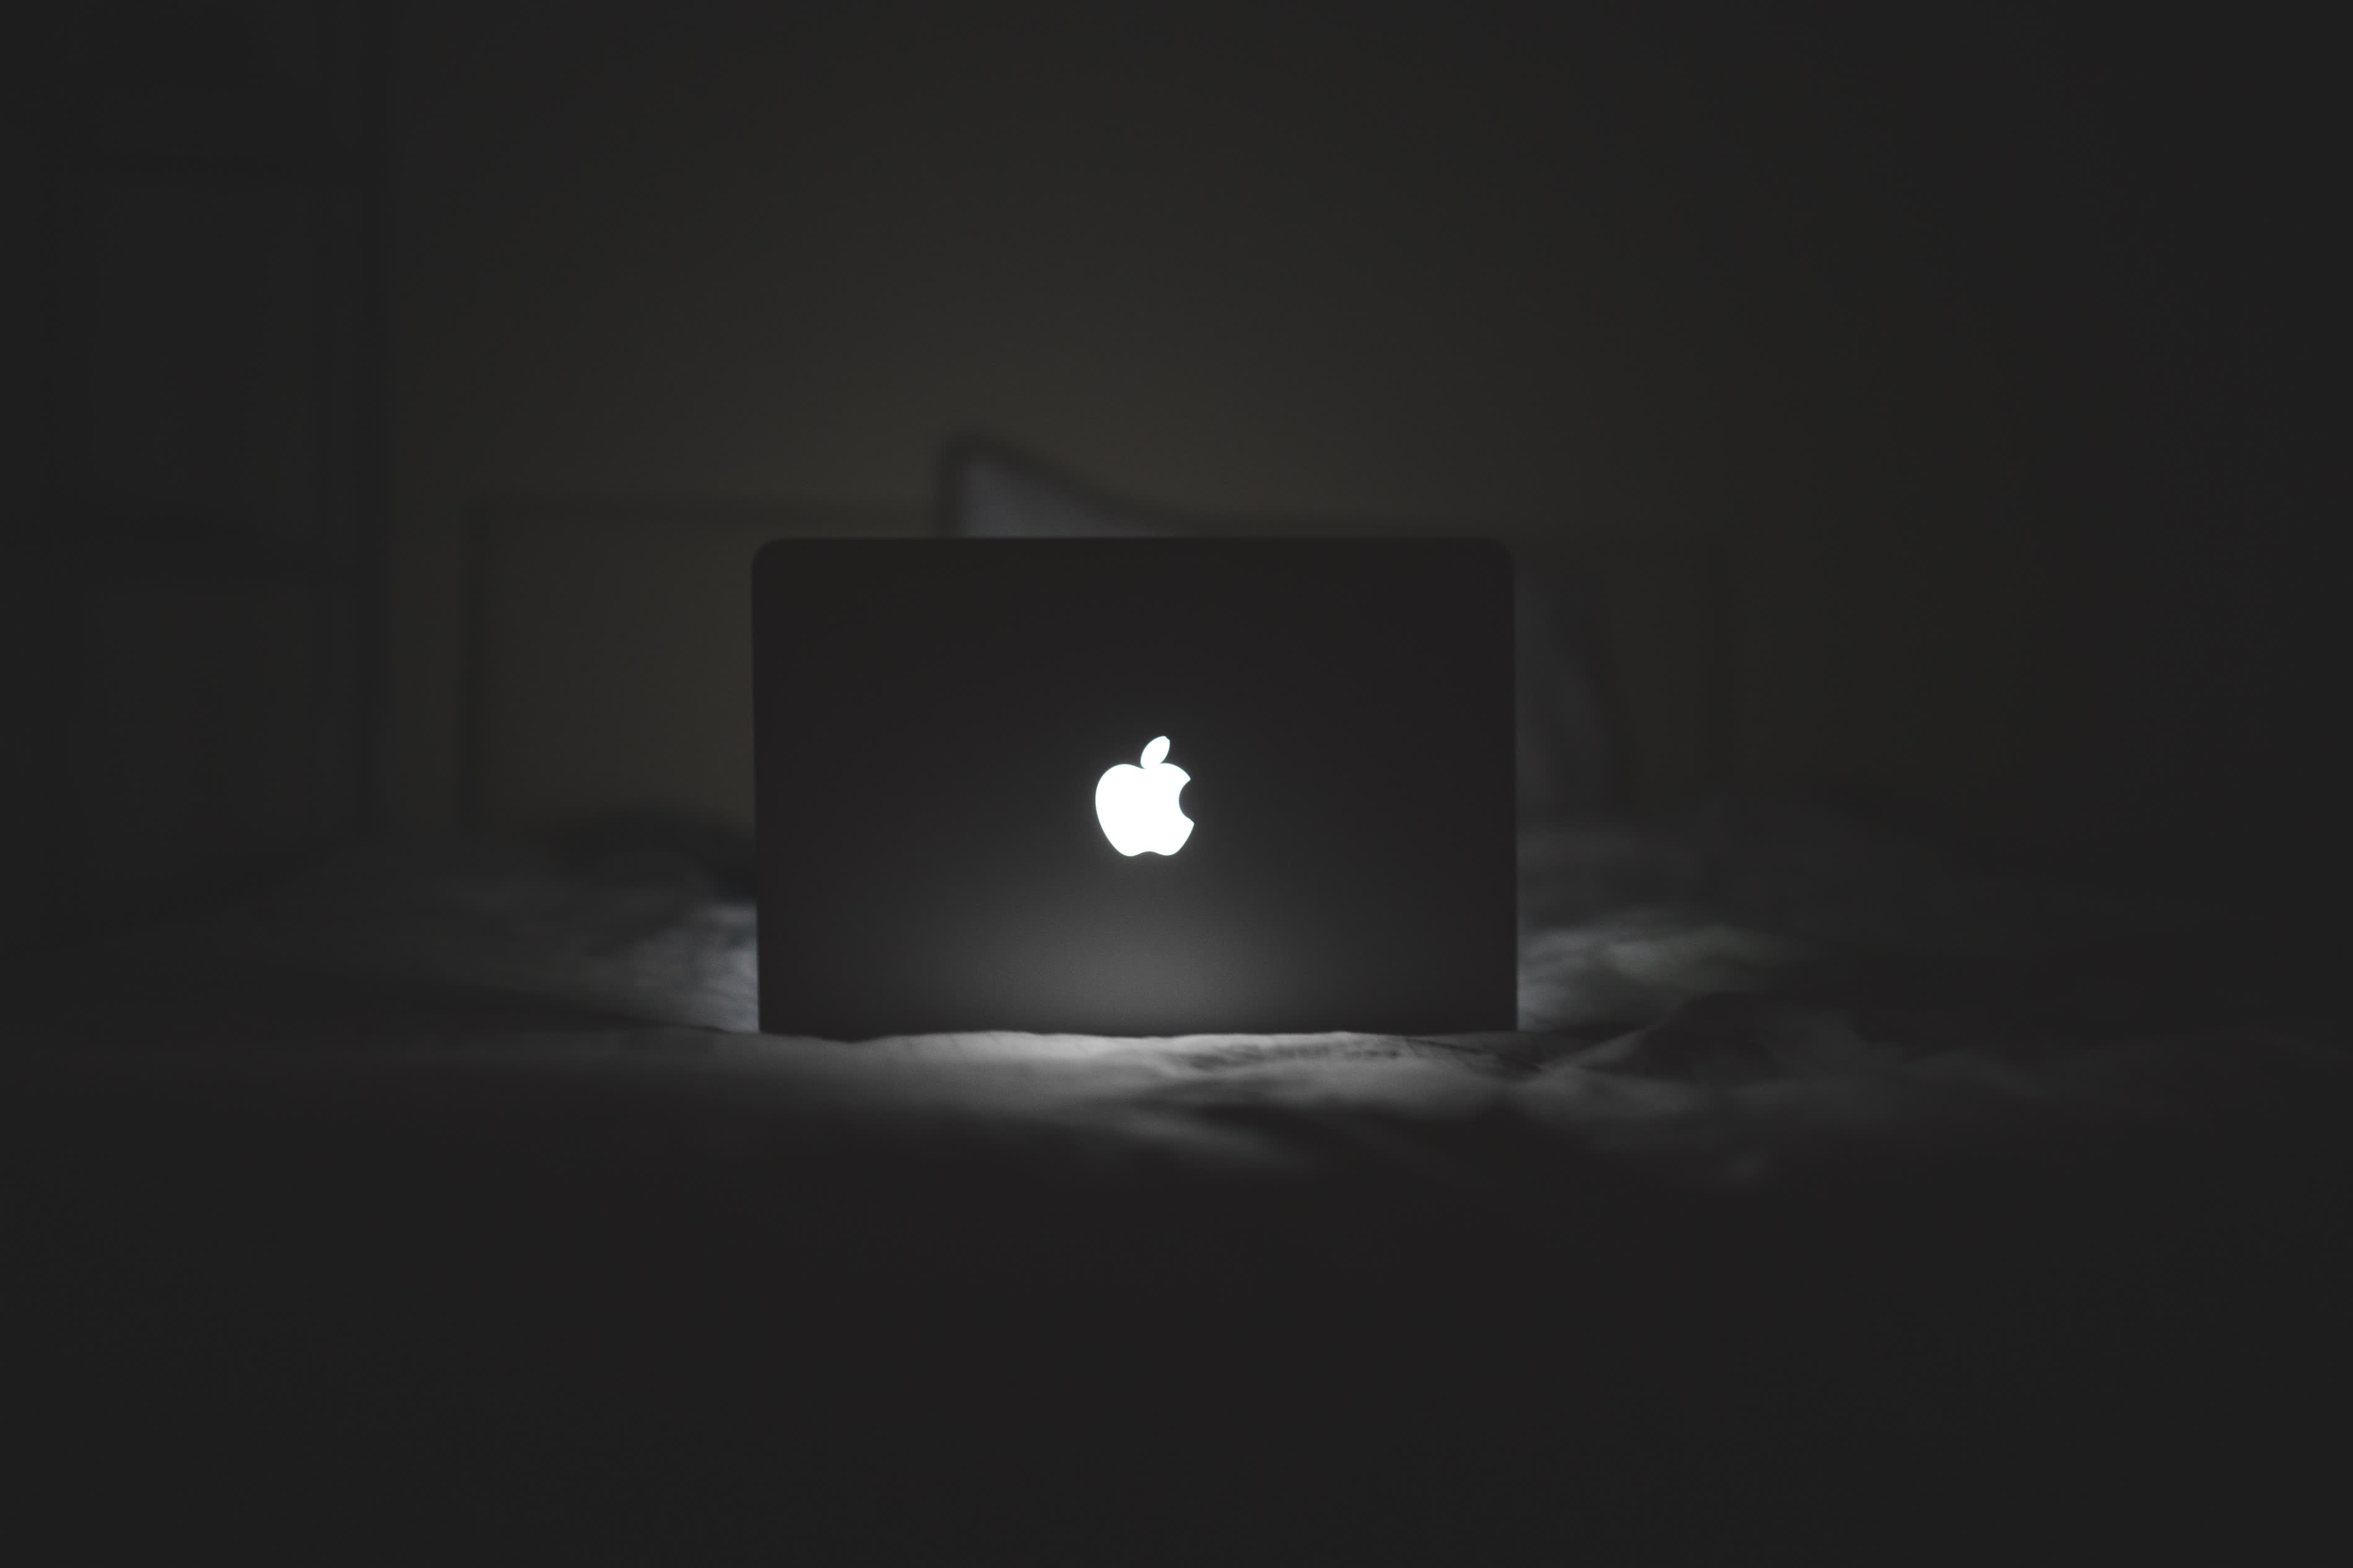 Zero-day flaw allows remote code execution even on fully-patched Macs